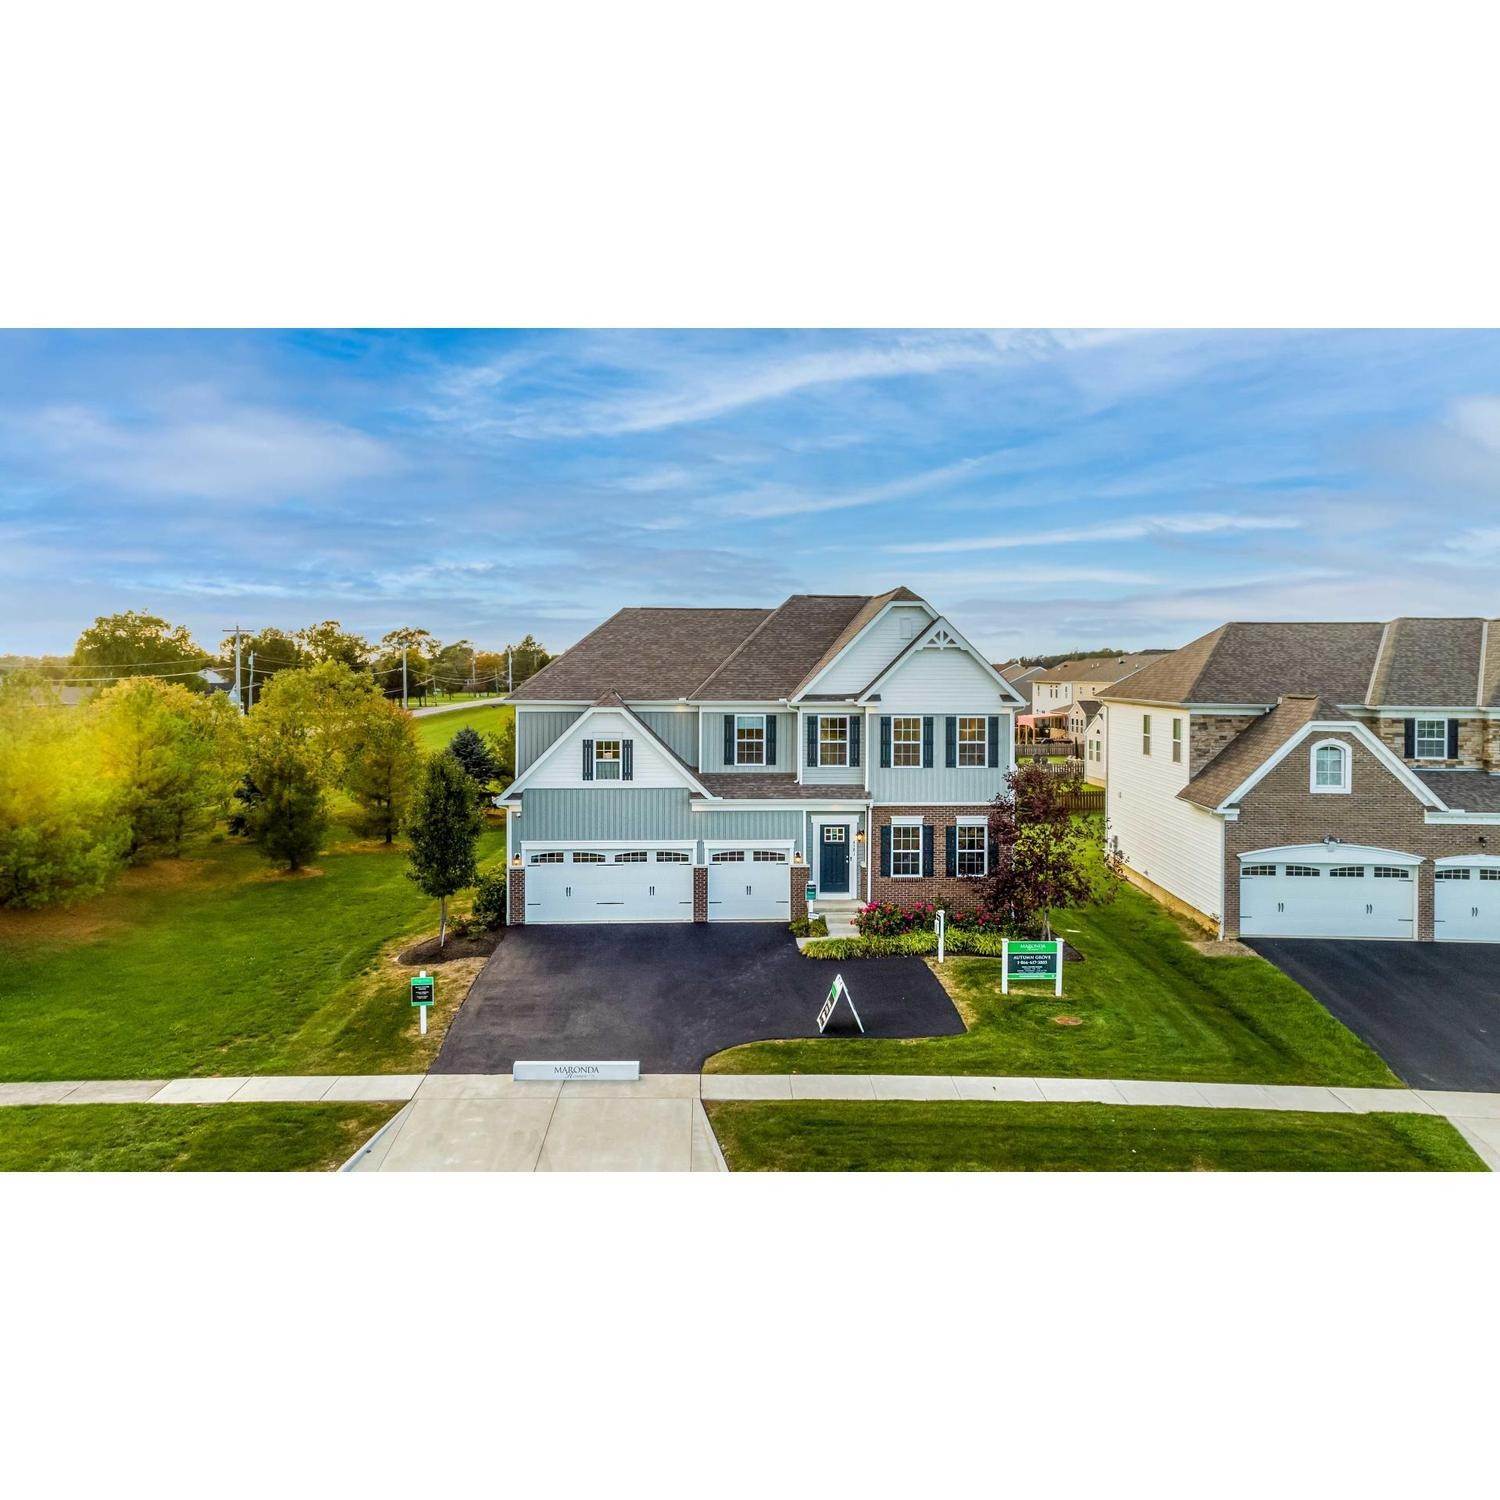 2. Windmont Farms building at 5115 Chalfant Lane, Gibsonia, PA 15044